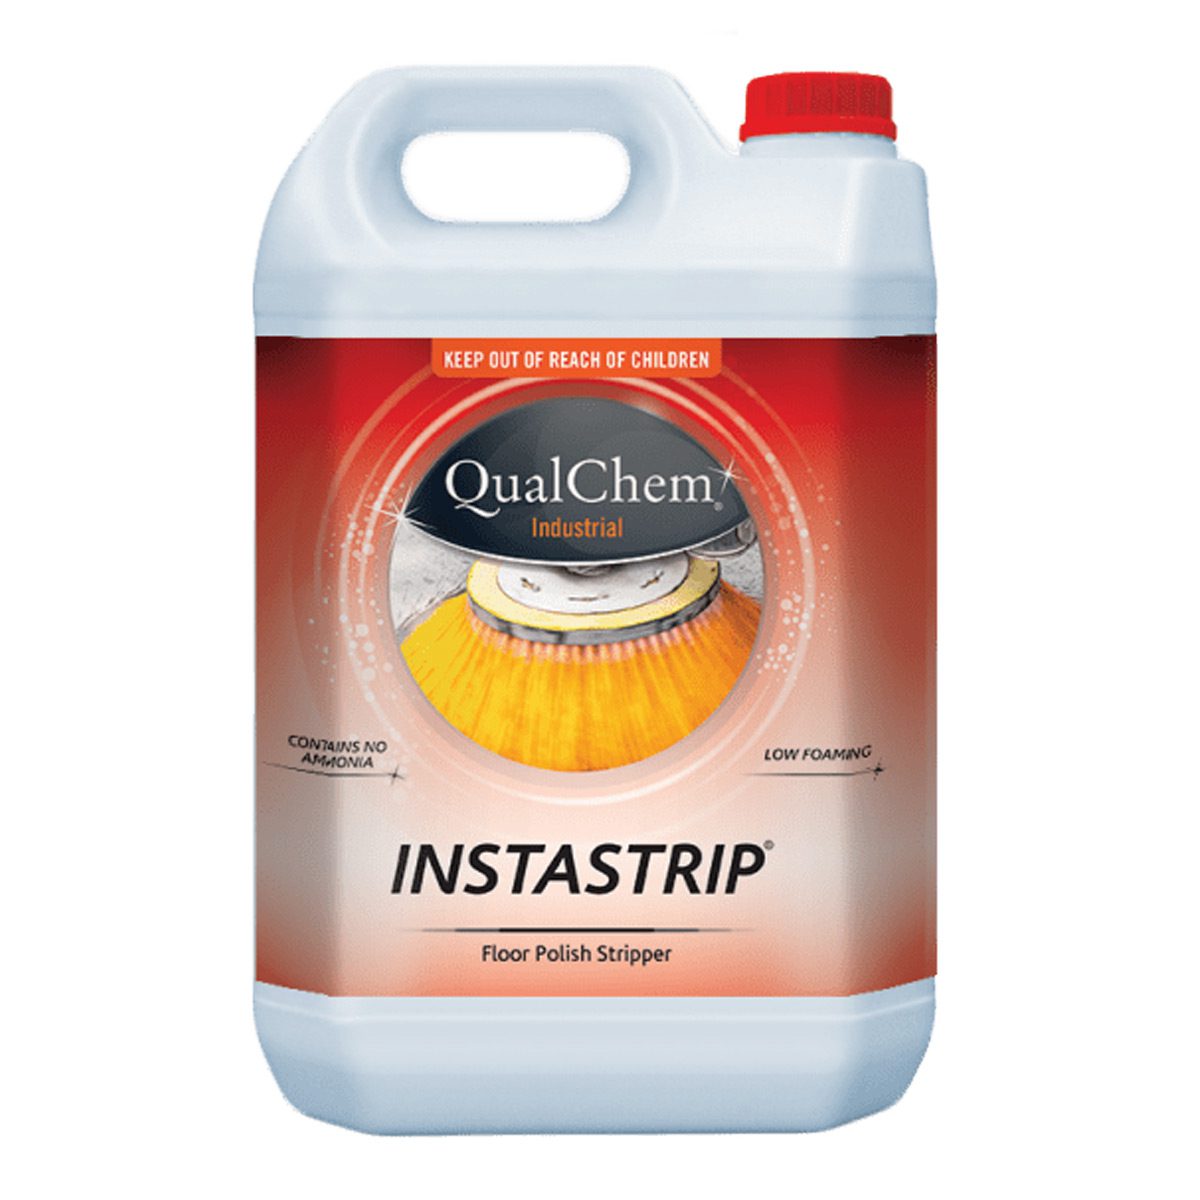 cleaning-products-floorcare-qualchem-instastrip-floor-polish-stripper-5L-litre-clear-highly-alkaline-powerful-non-ammoniated-liquid-stripper-removing-wax-acrylic-polymer-floors-vjs-distributors-IST5